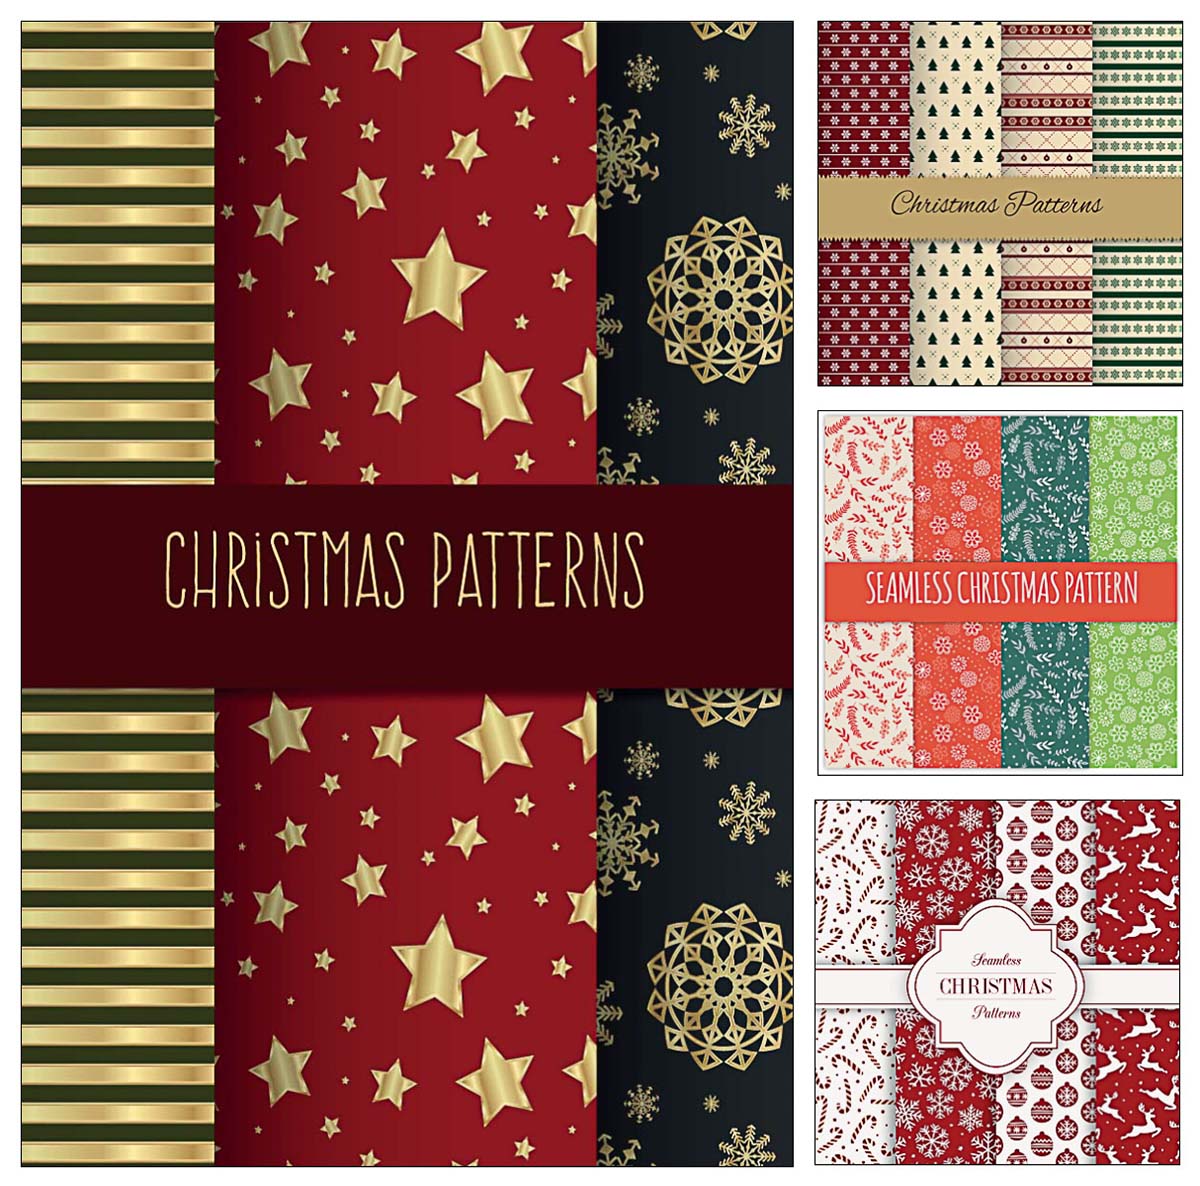 Cute Christmas patterns wrapping paper vector